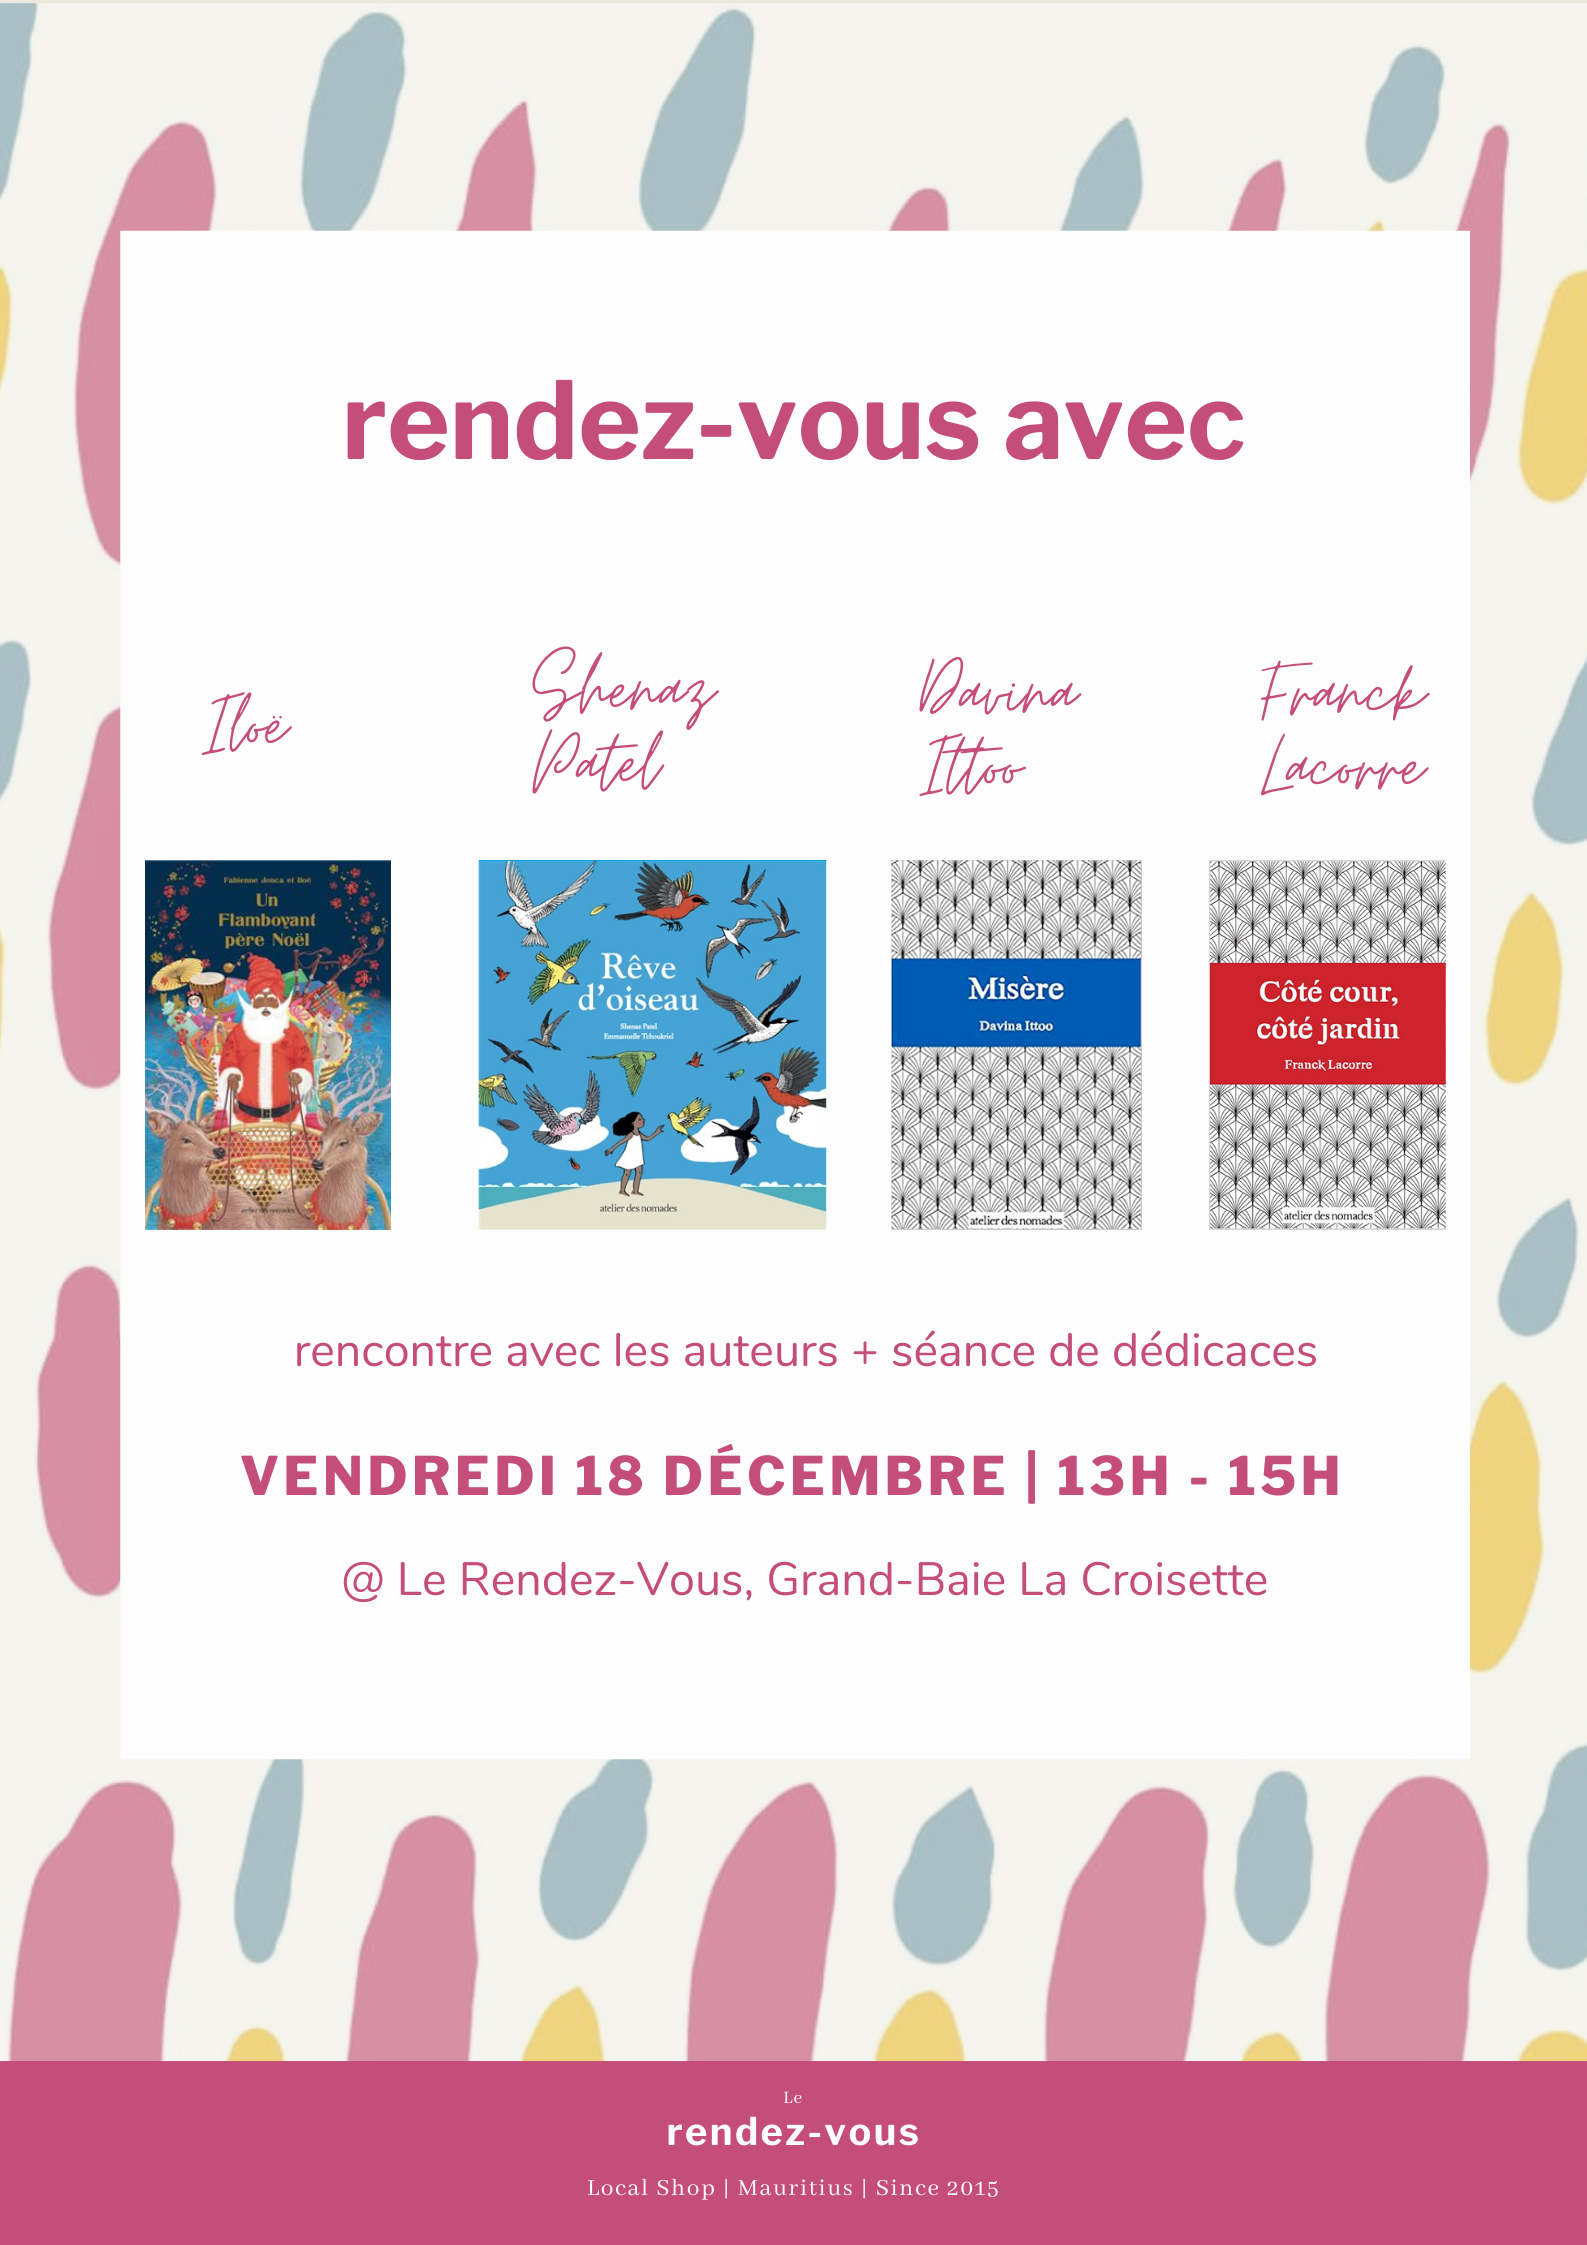 Book Signing at Le REndez-Vous